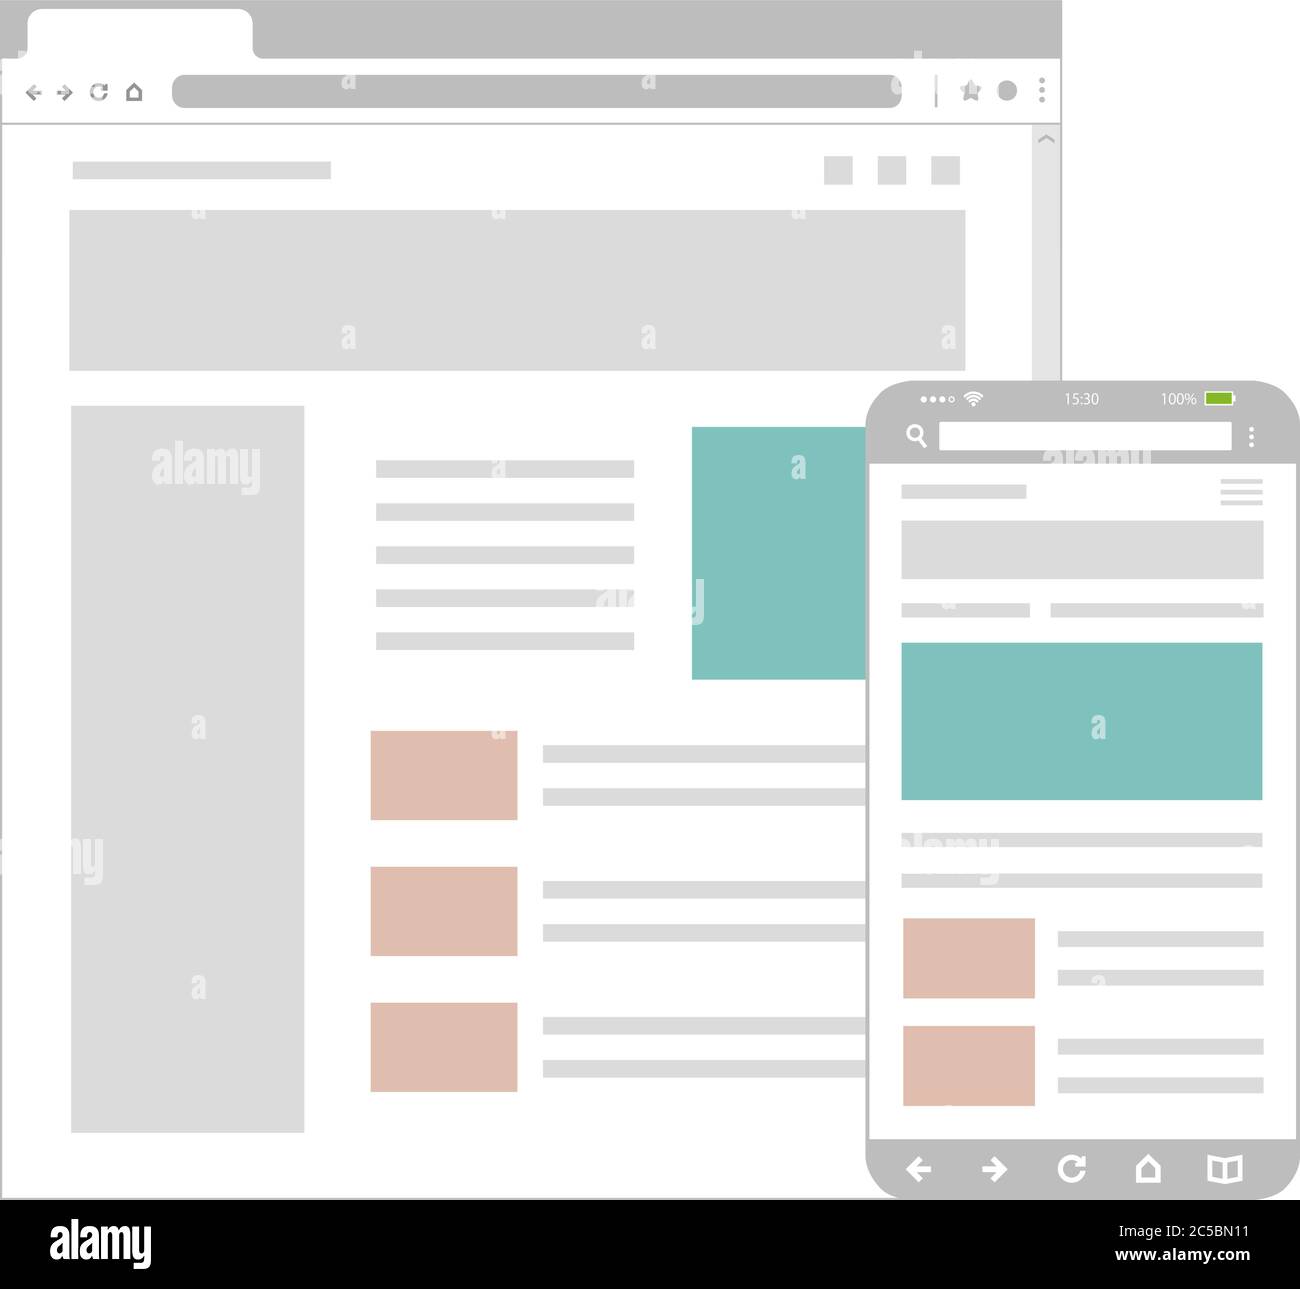 Web pages wireframe layout illustration / Web design template for PC ...